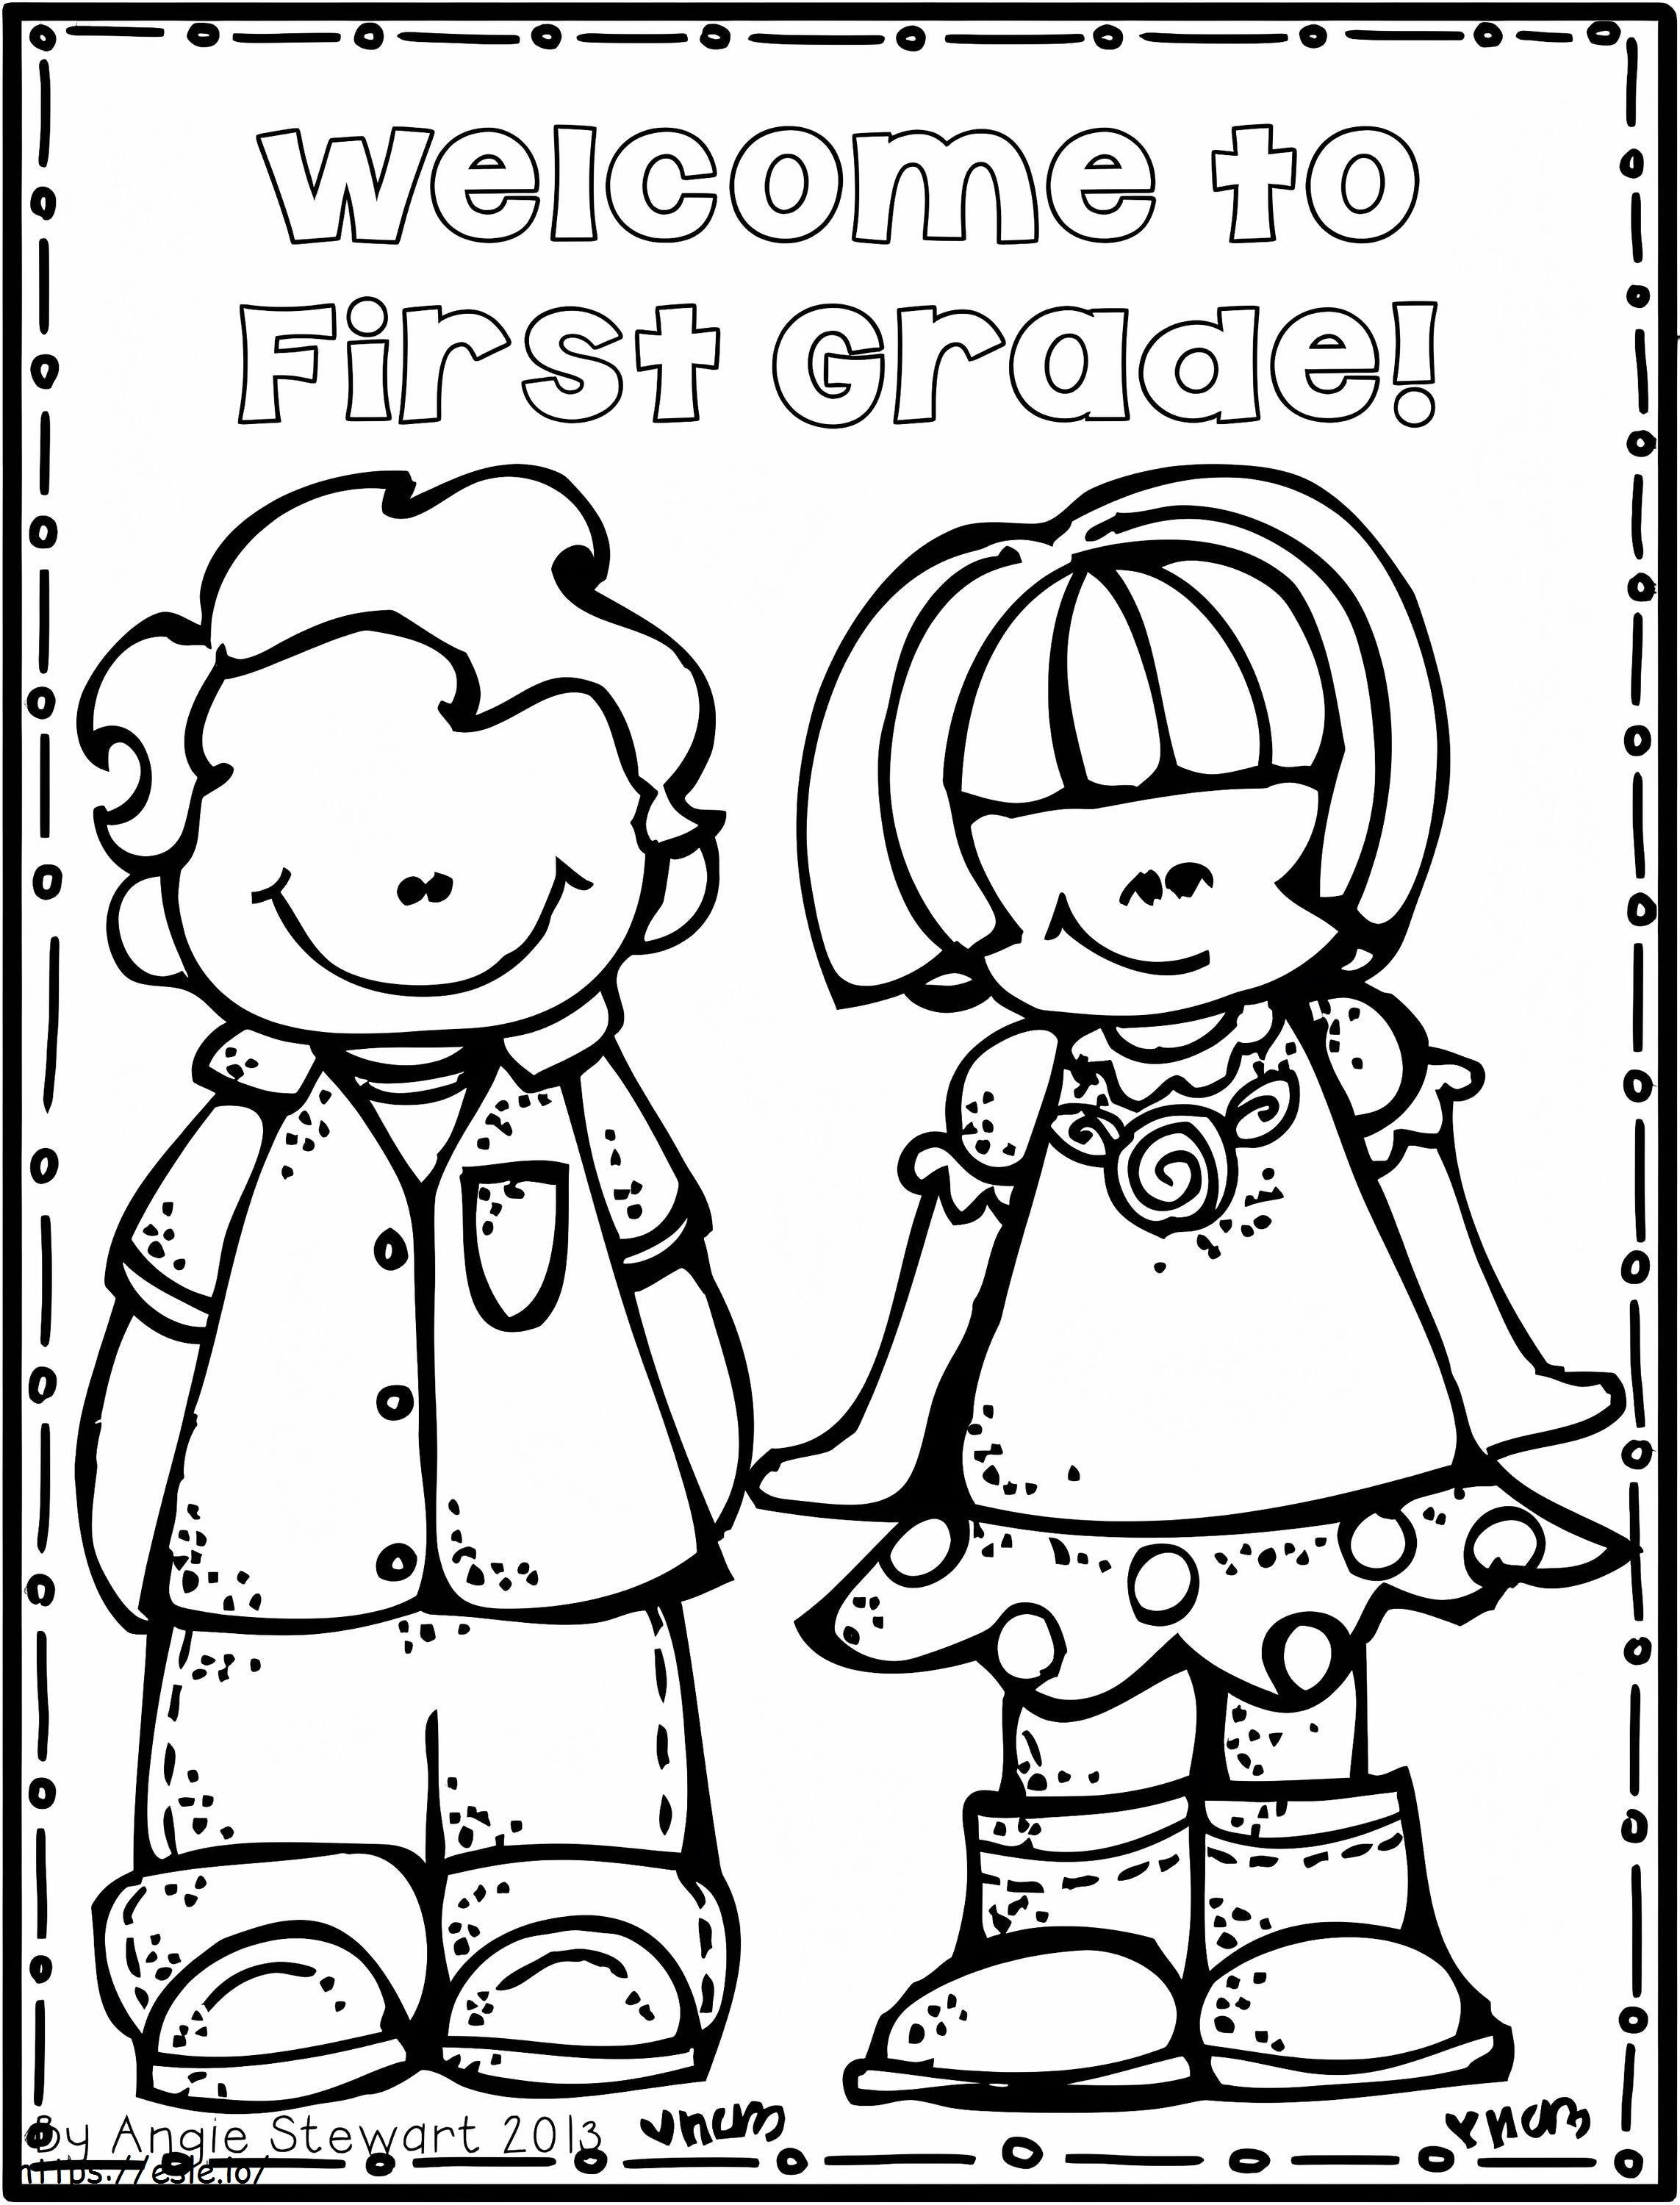 Free Printable Welcome To First Grade coloring page